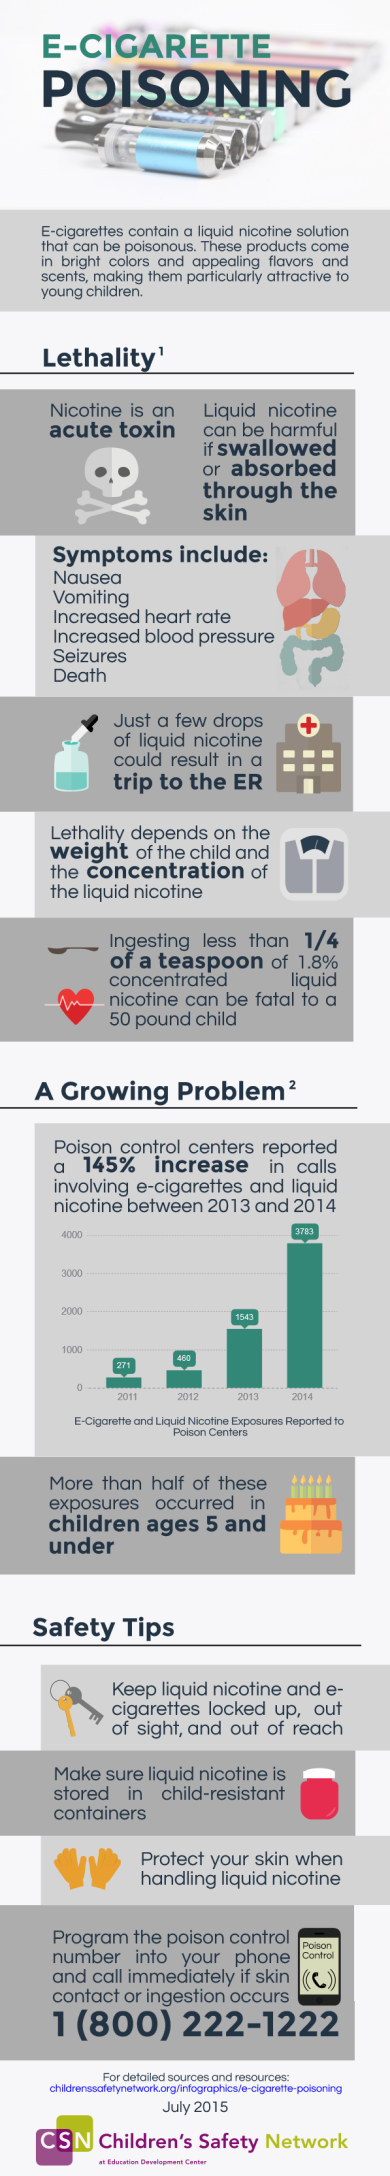 e-cigarettes and nicotine poisoning infographic